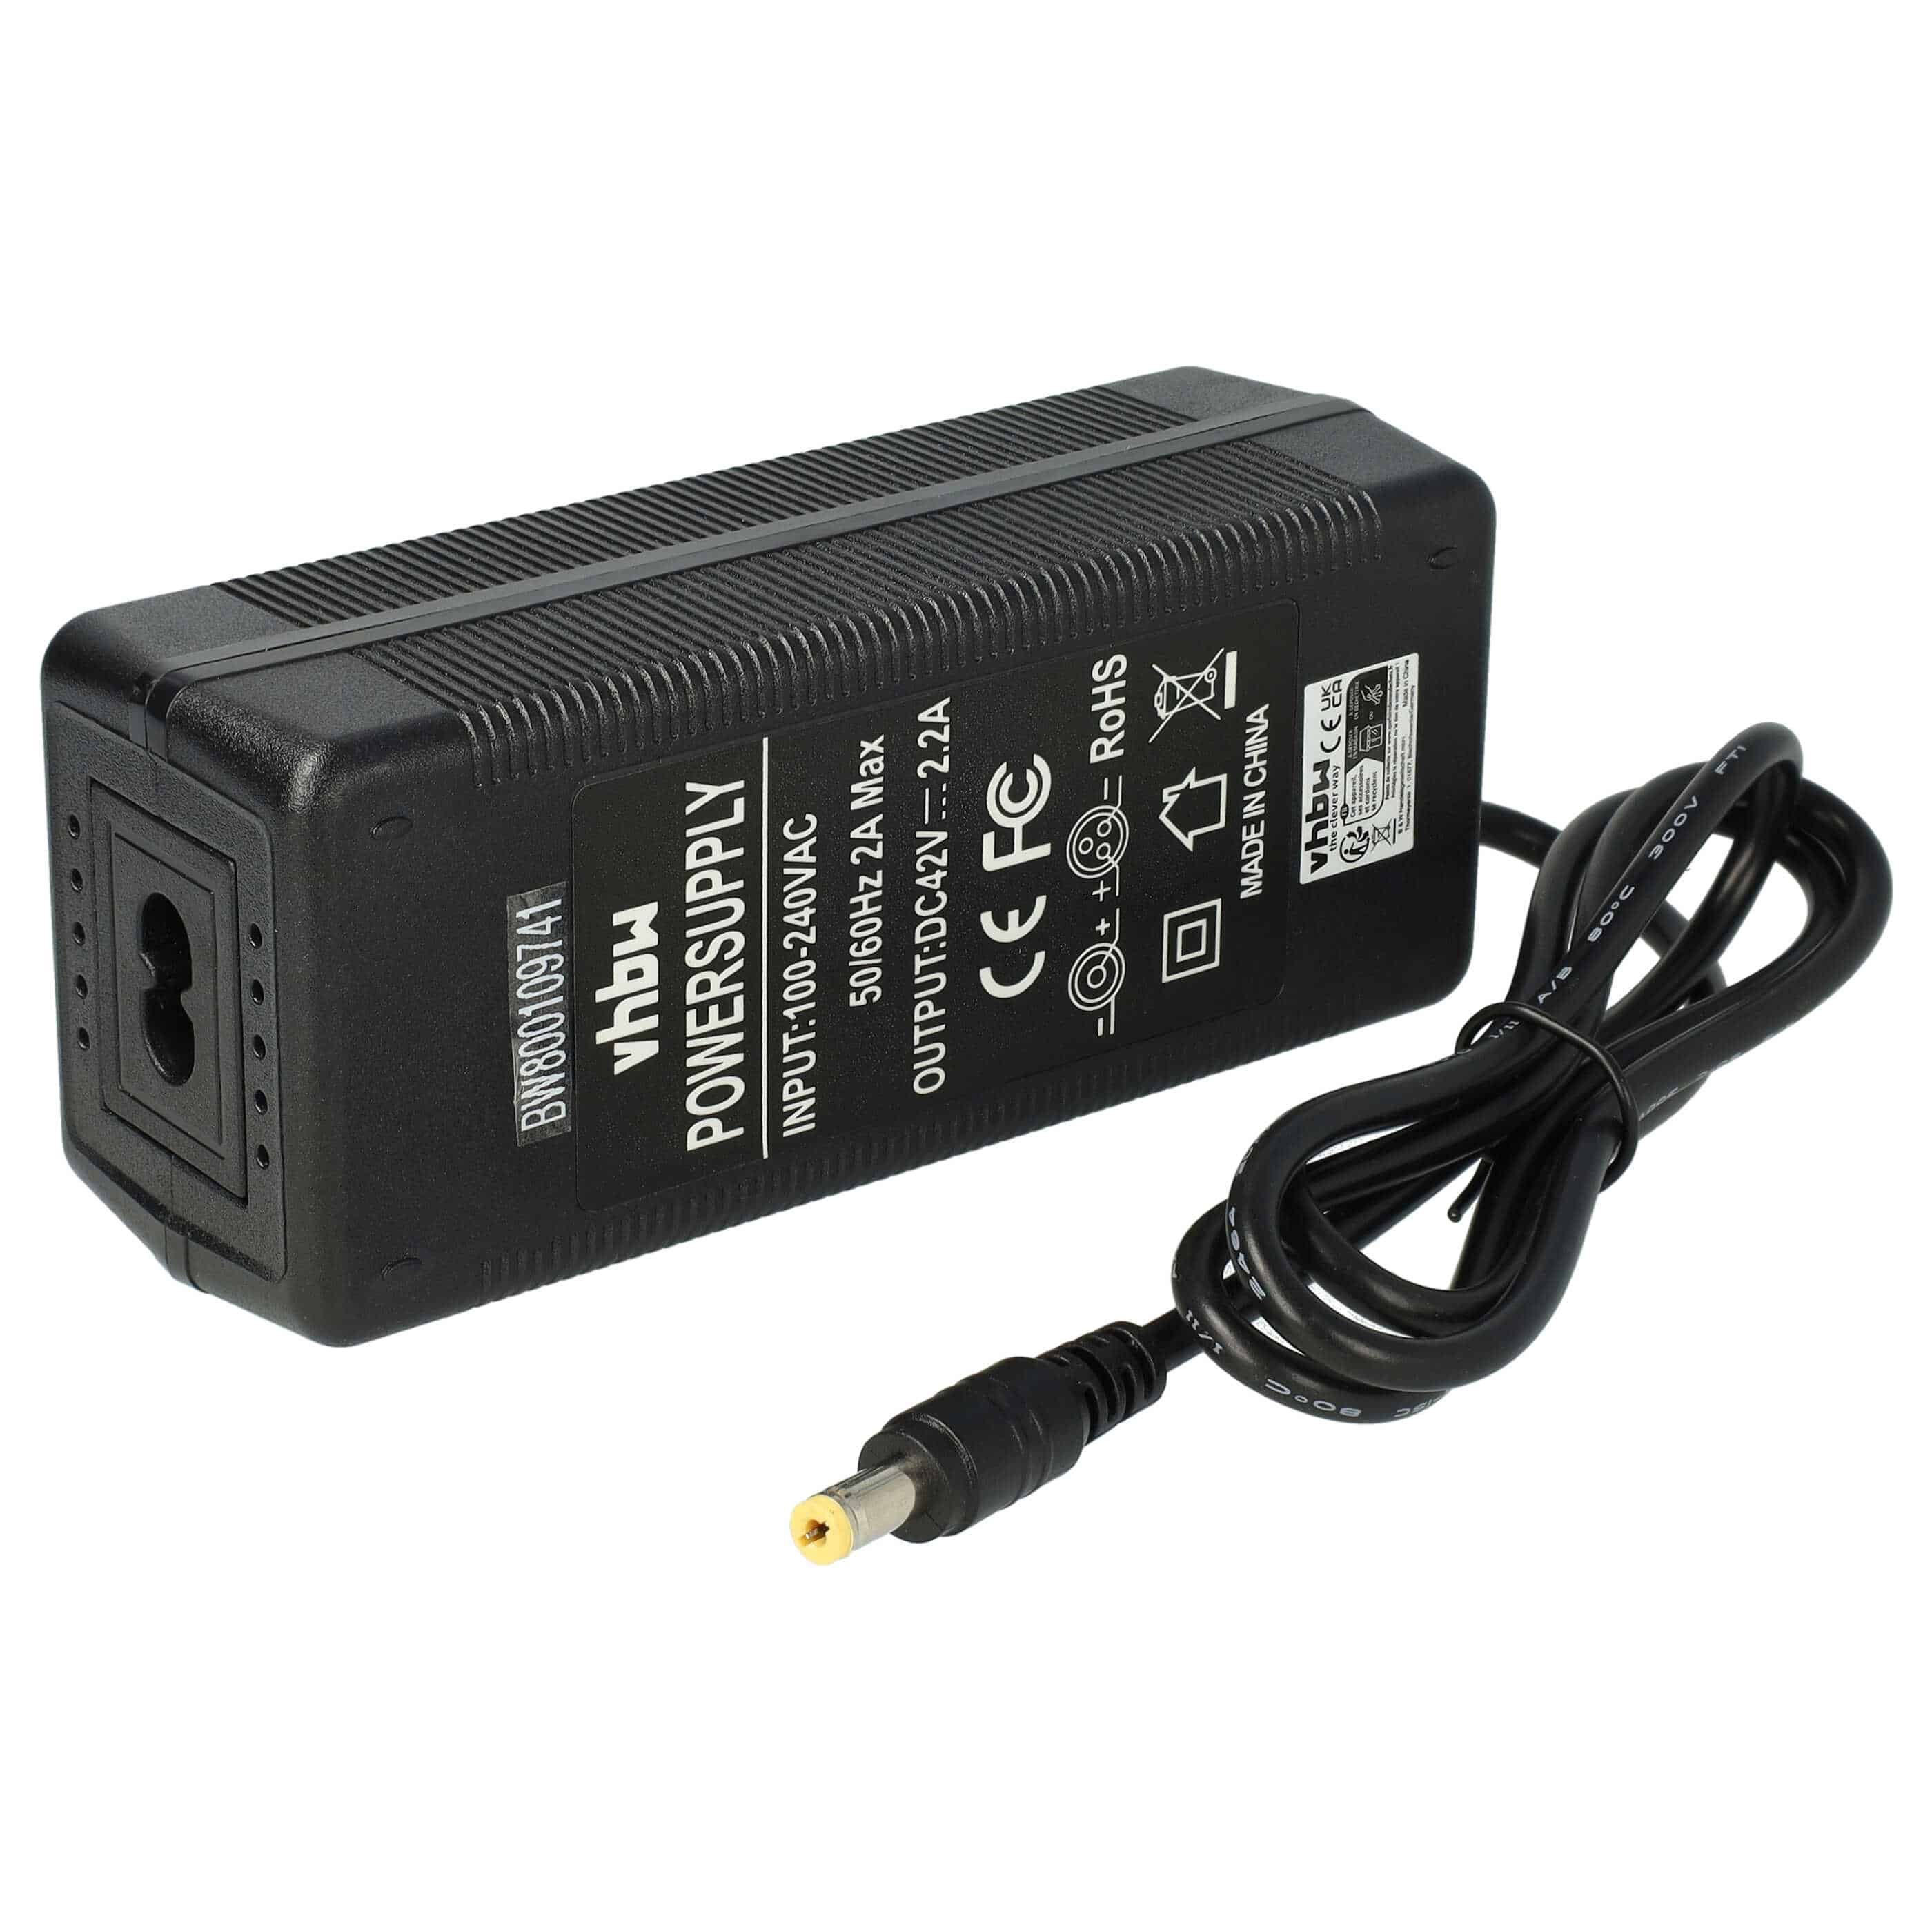 Charger suitable for E-Bike Battery - For 36 V Batteries, With Round Plug, 2.2 A